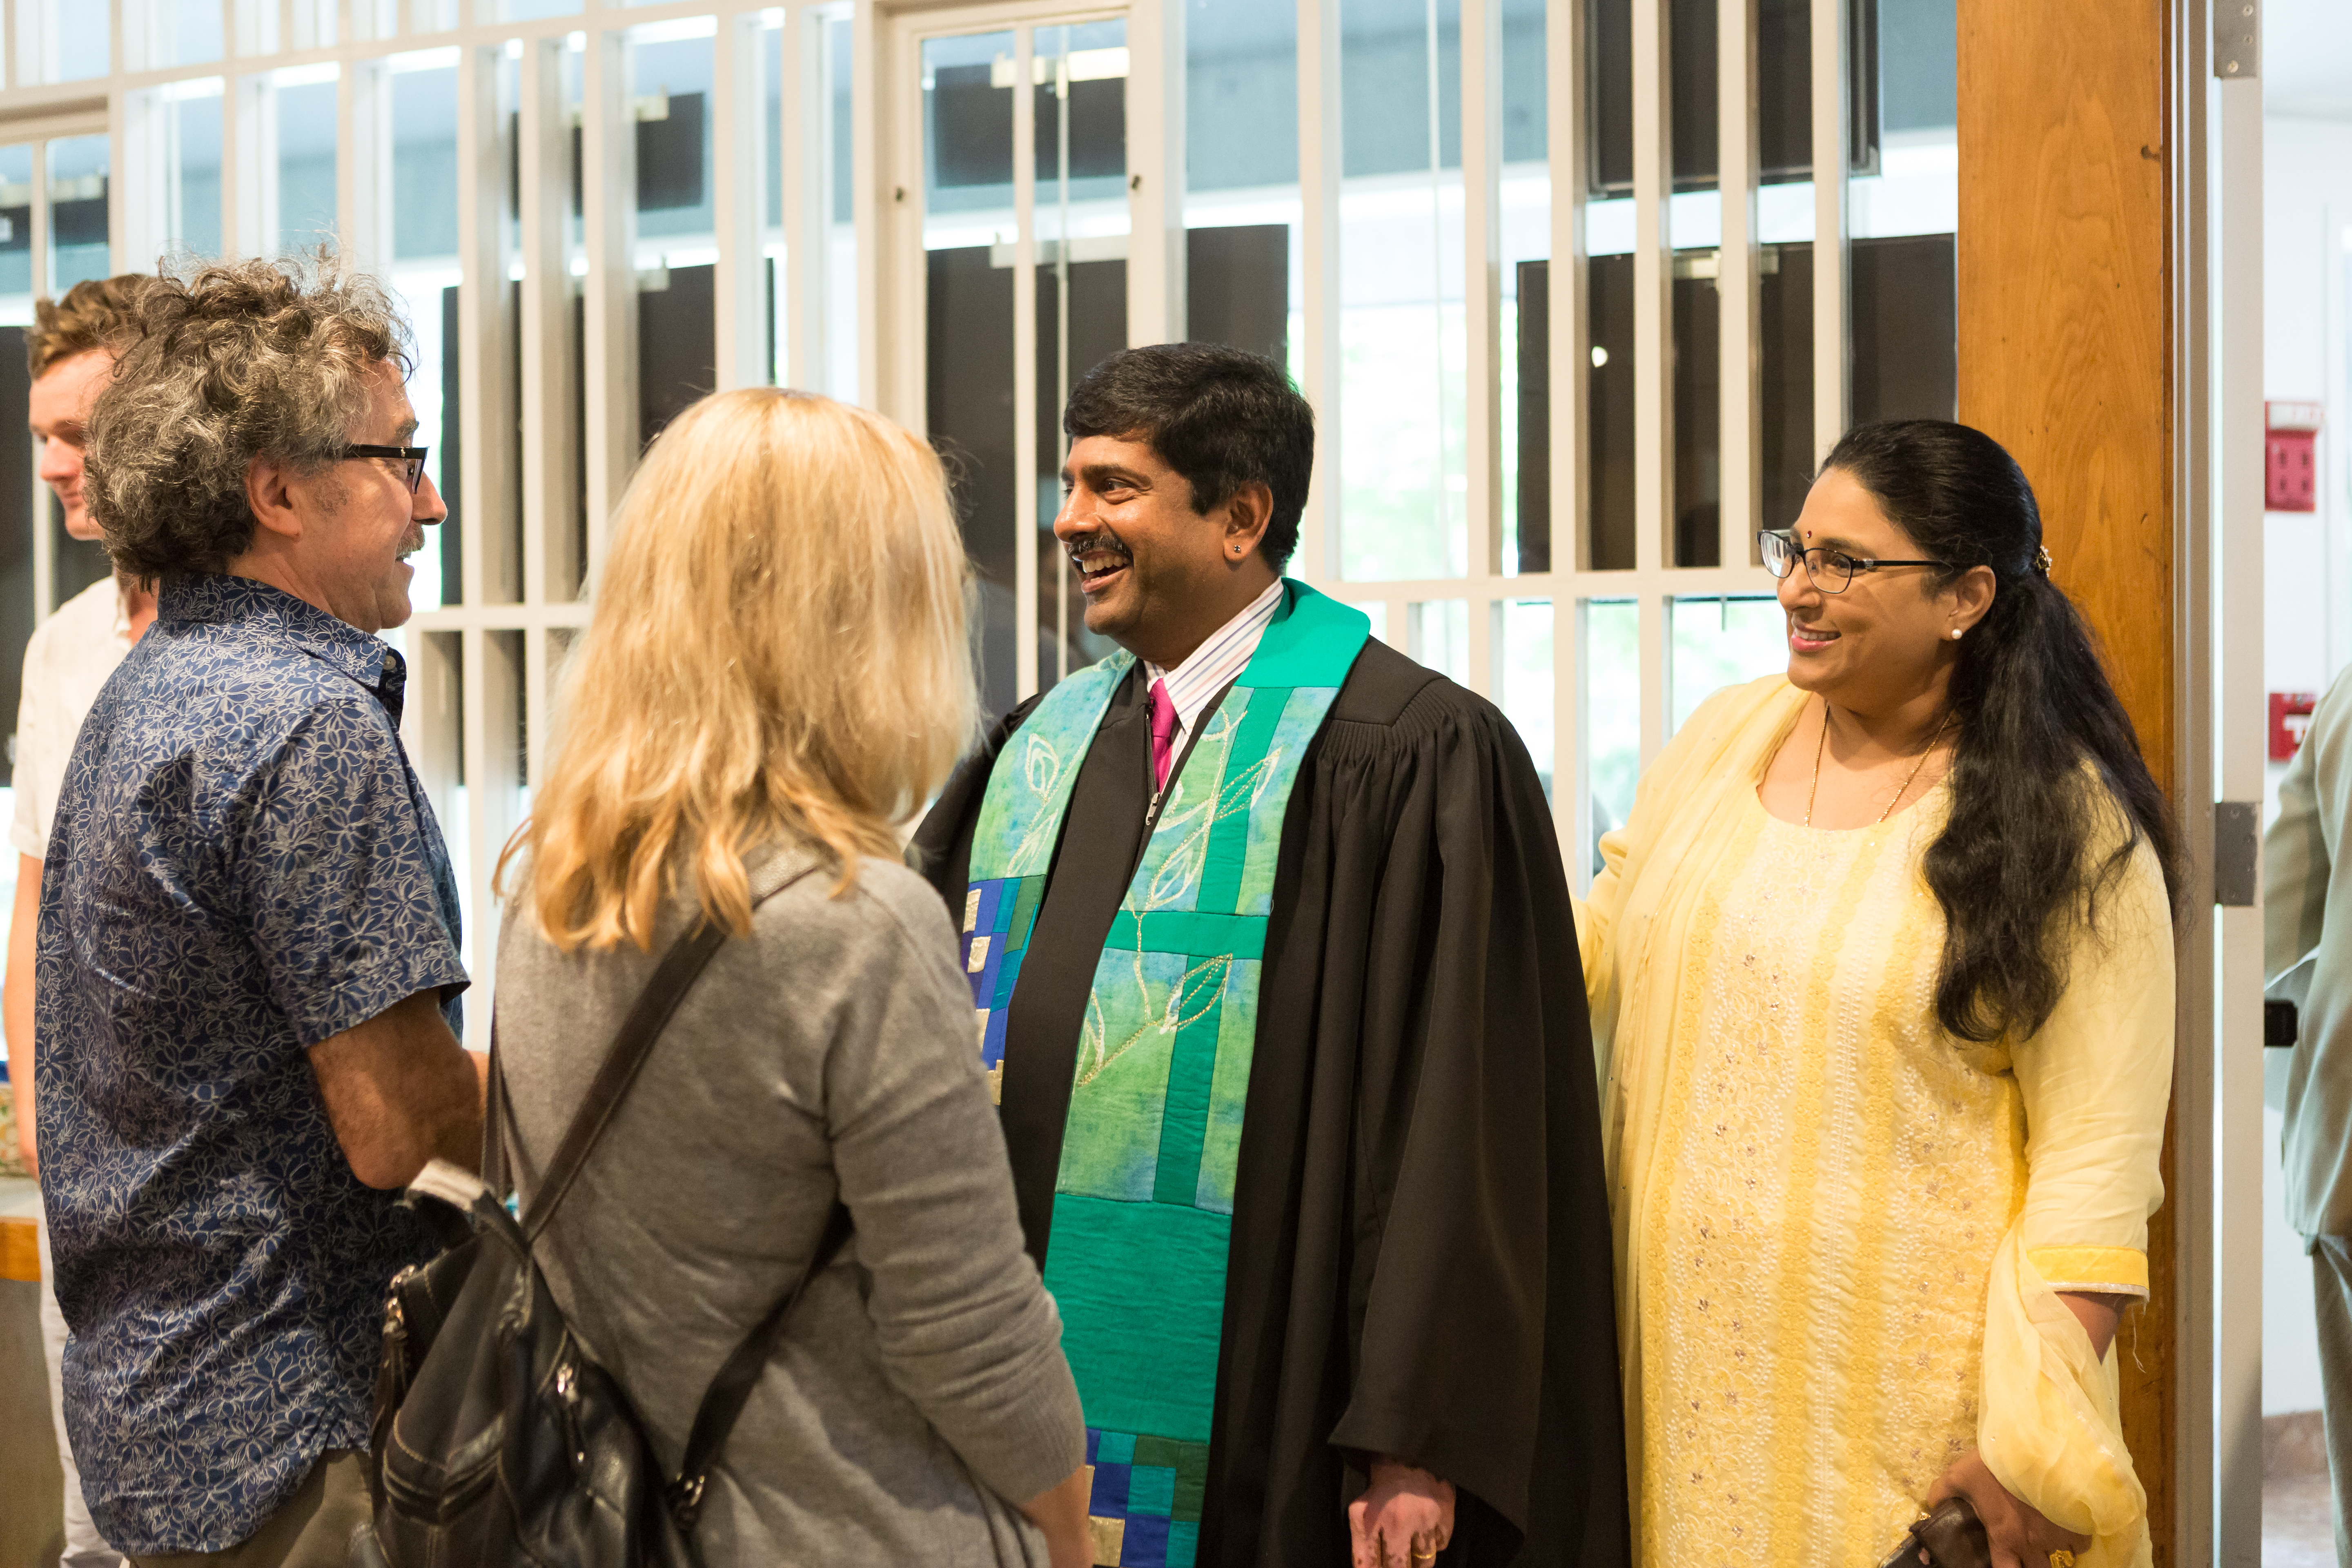 photo of Rev. Abhi and his wife in the welcoming line to greet congregants after worship on a Sunday